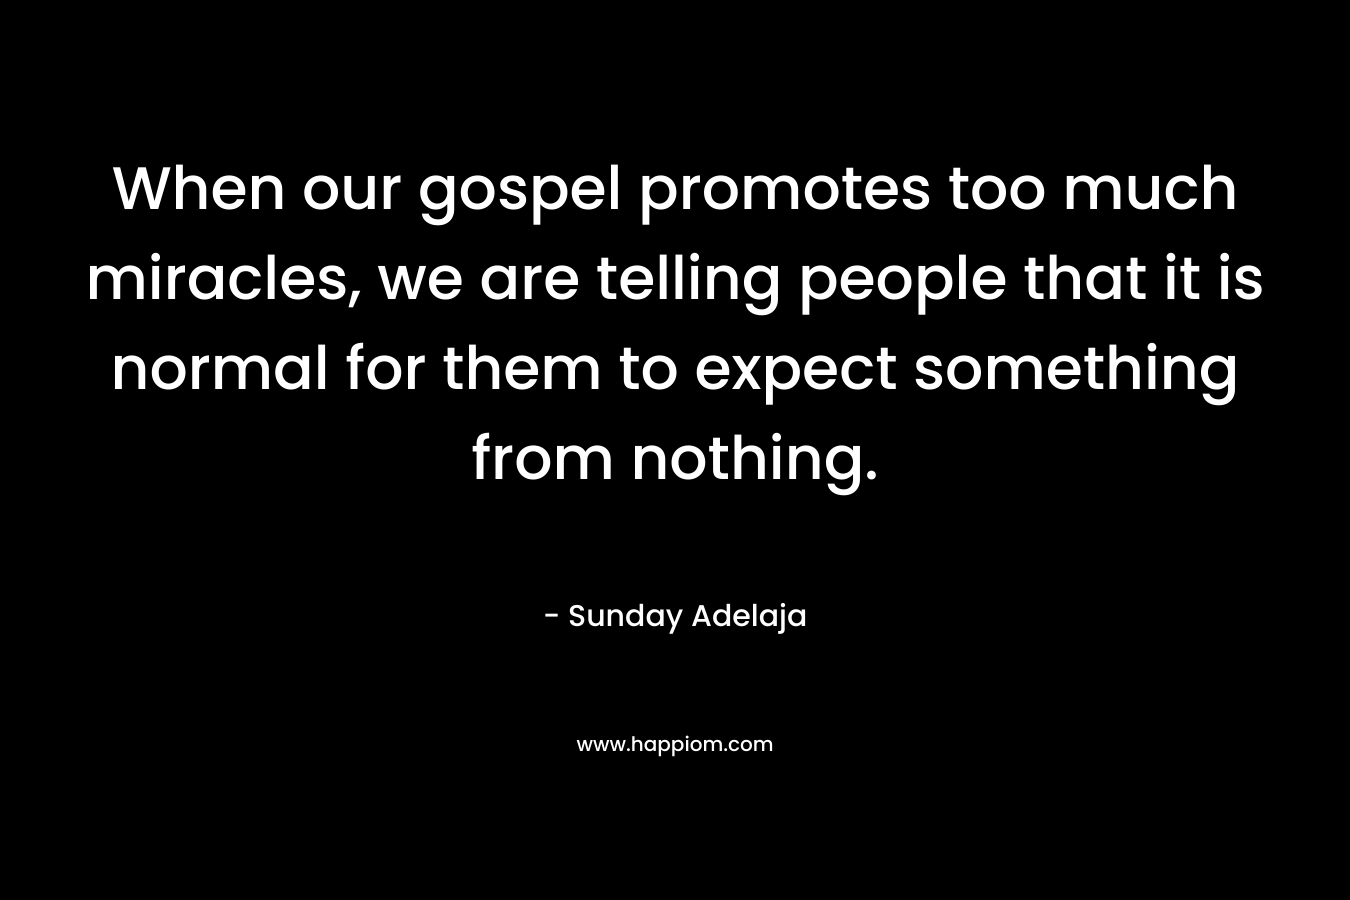 When our gospel promotes too much miracles, we are telling people that it is normal for them to expect something from nothing.